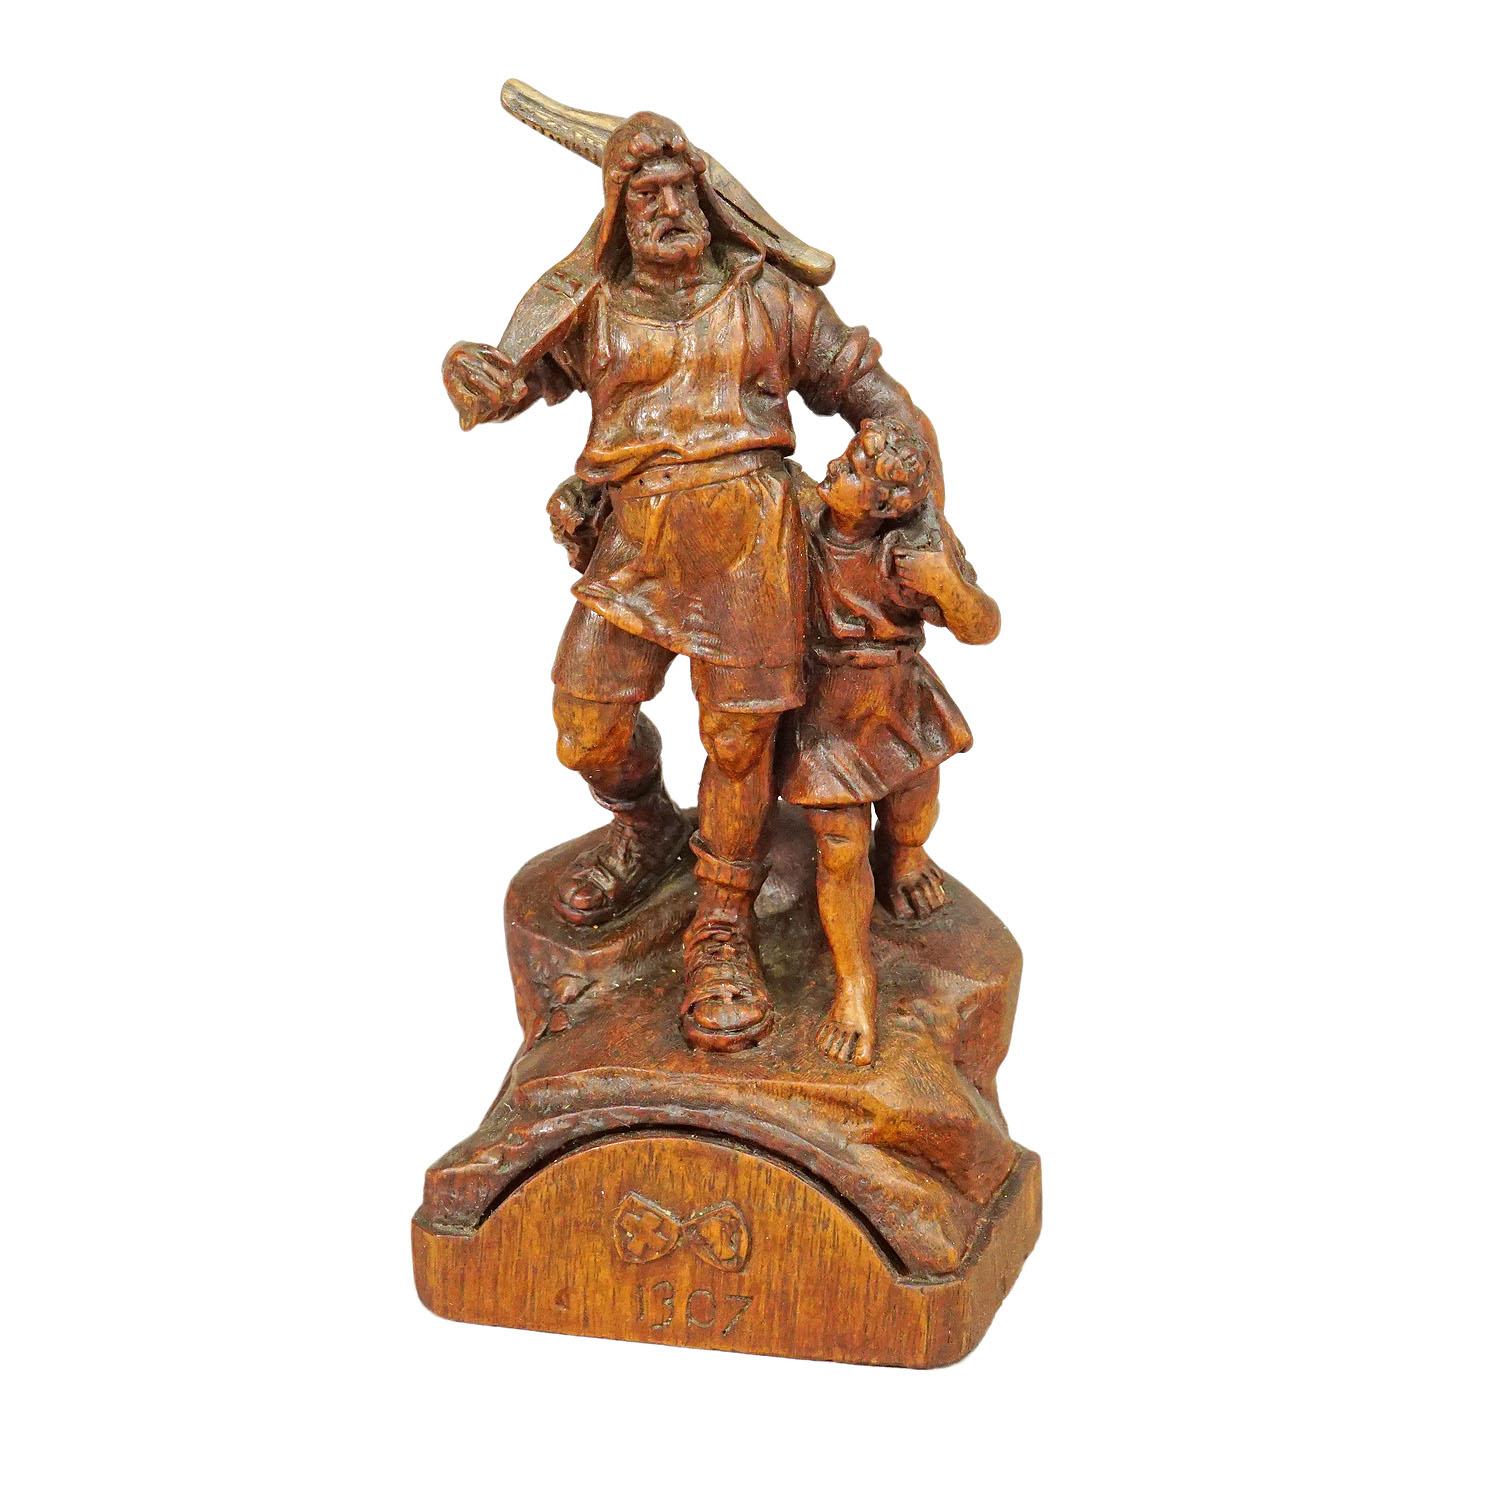 Antique Wooden Statue of Wilhelm Tell, Brienz circa 1900

A nice handcarved wooden statue featuring Wilhelm Tell and his son. It is a classical carving art made in Brienz, Switzerland circa 1900. Wilhelm Tell is a legendary Swiss freedom fighter.